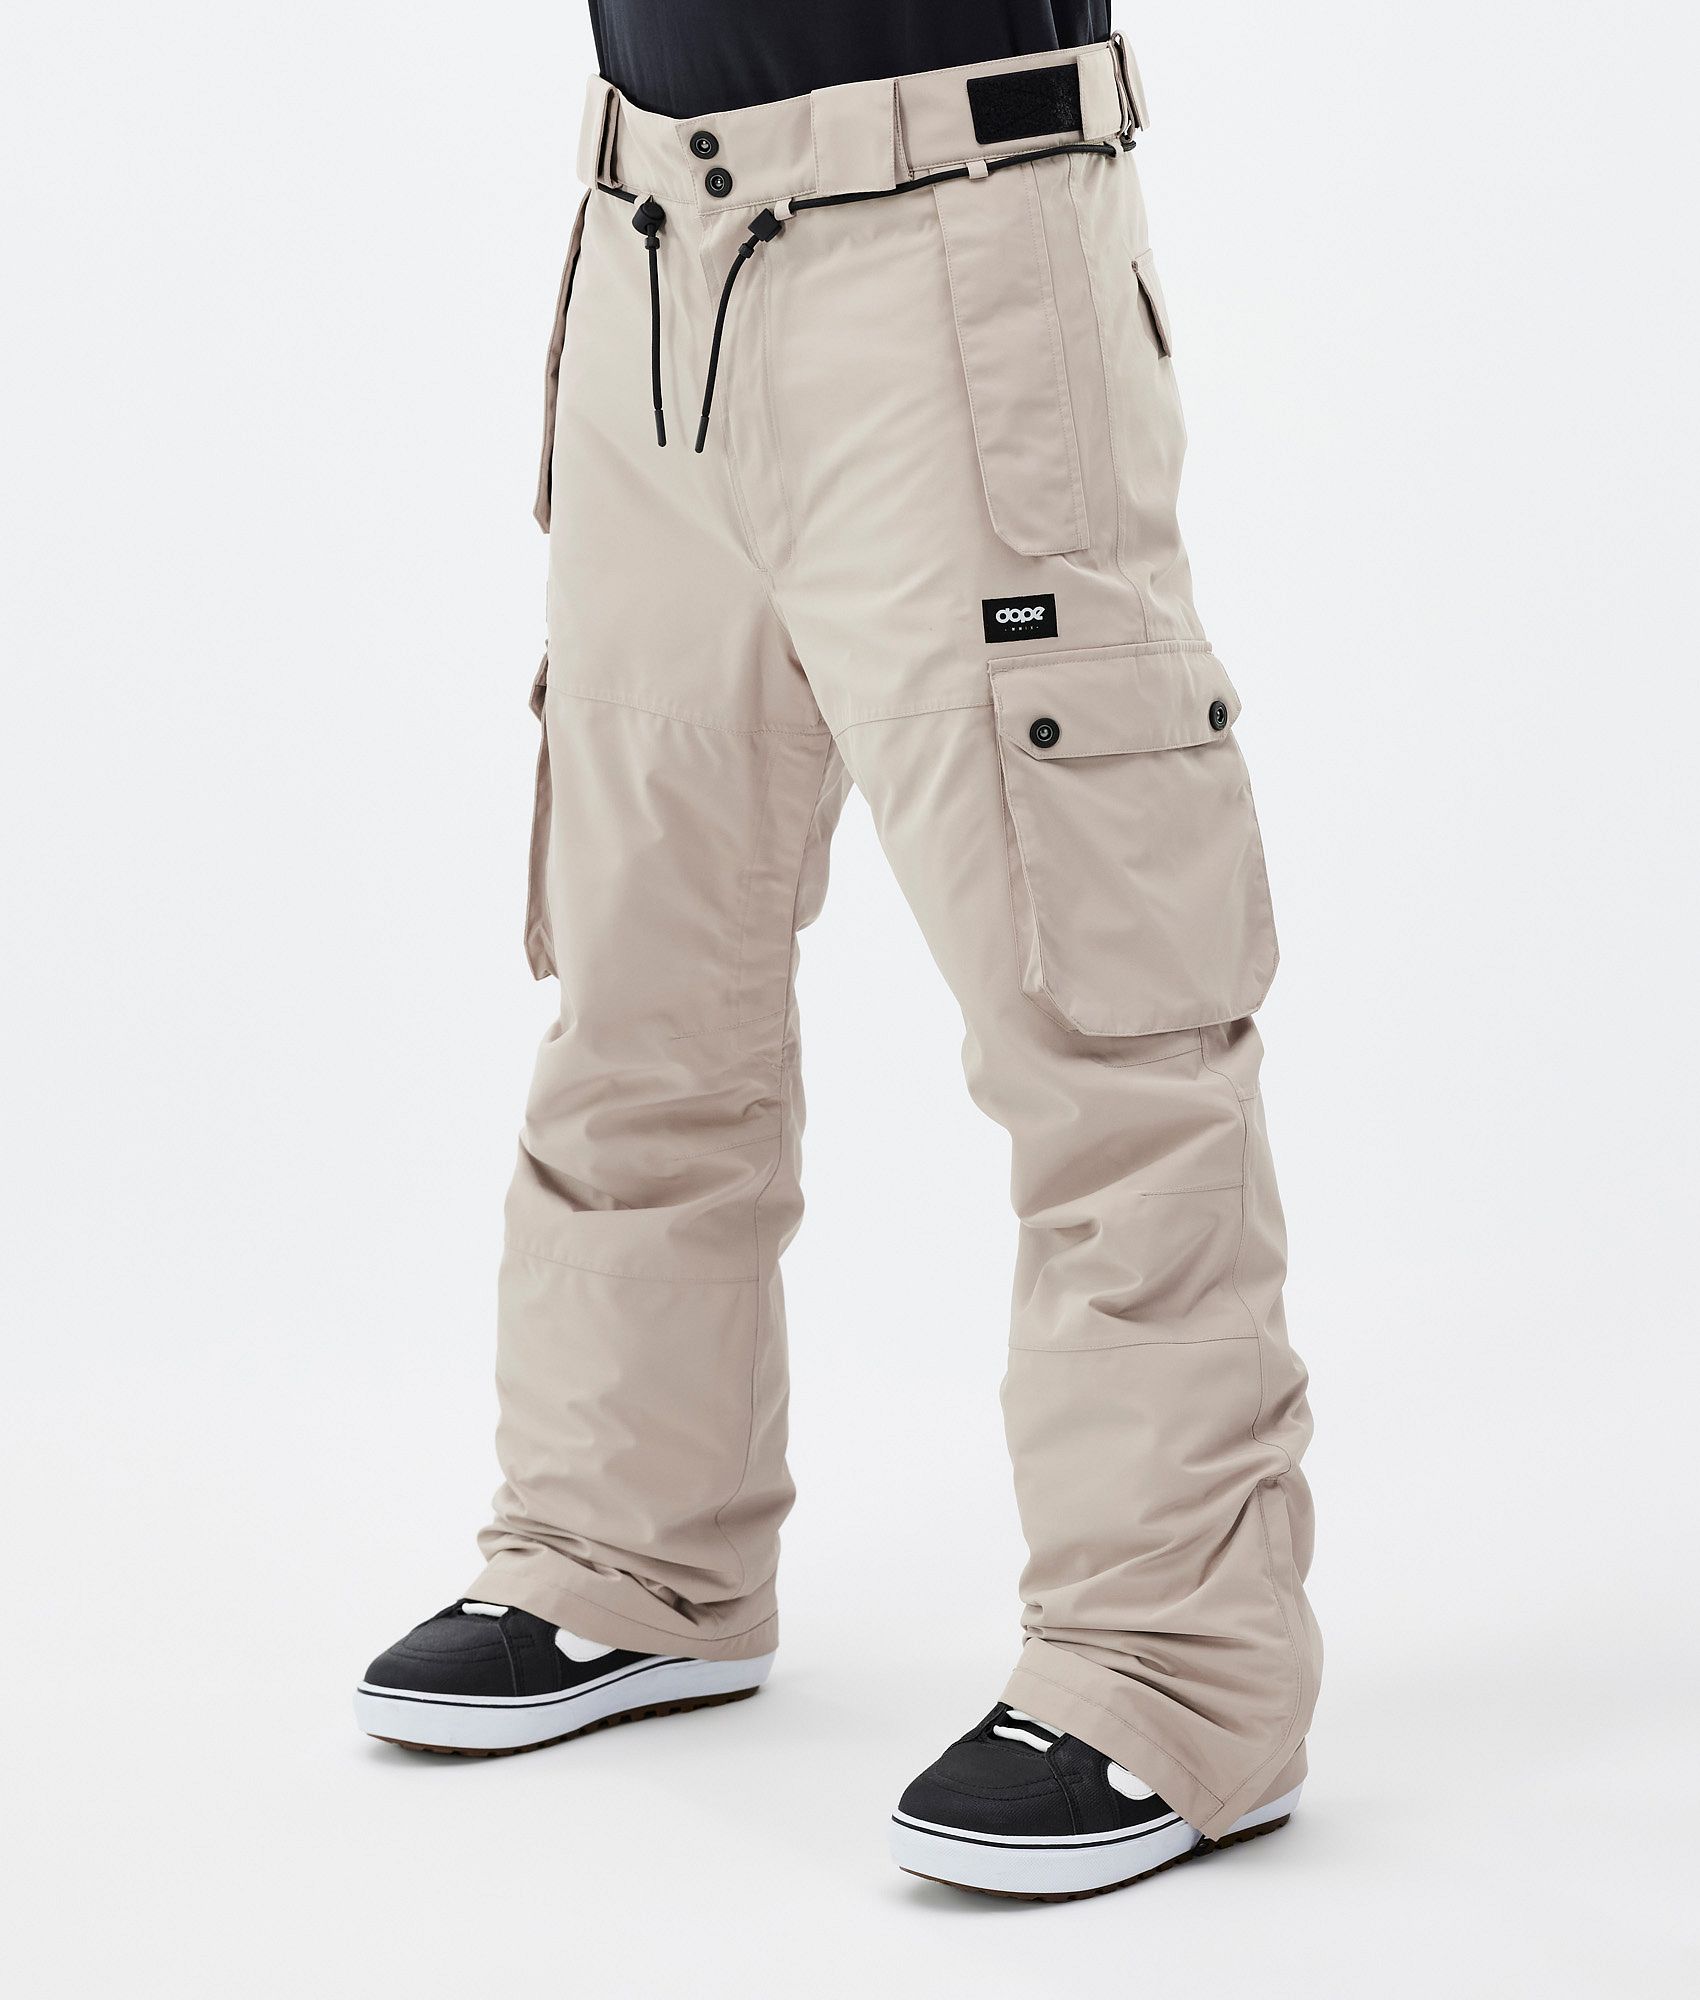 Snowboard Pants for Men  Women  4F Sportswear and shoes